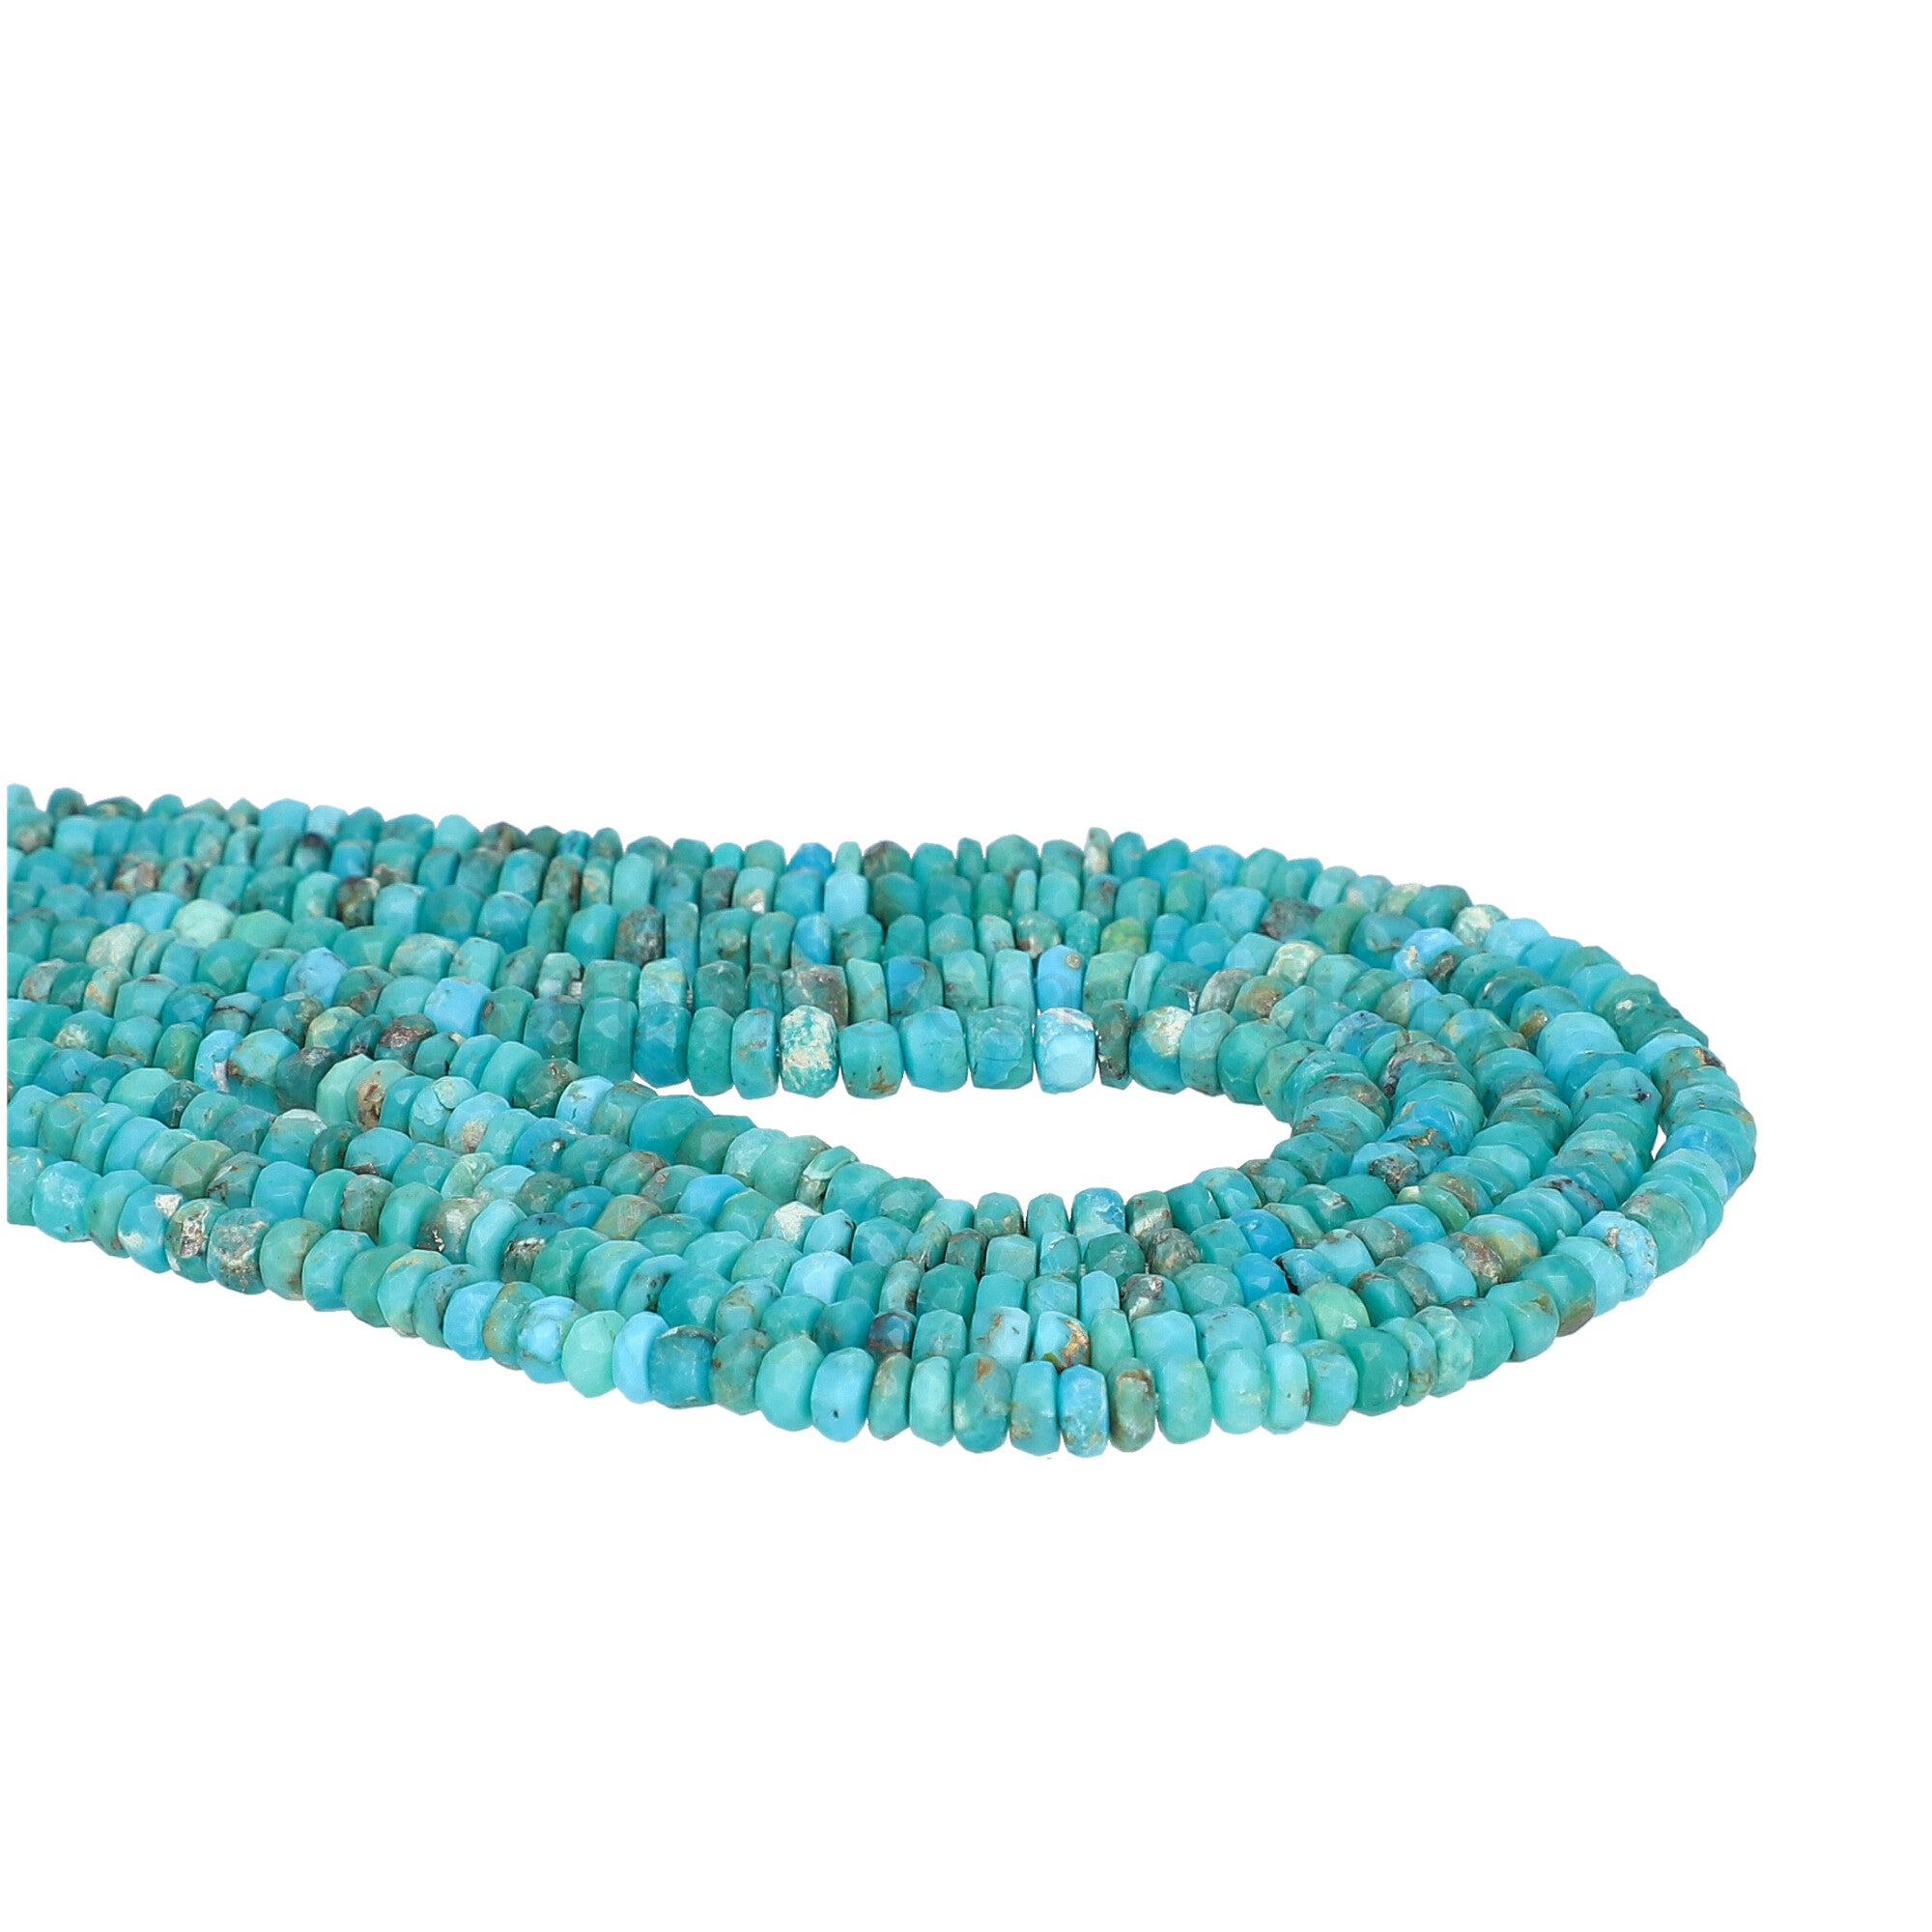 Natural Kingman Mine Turquoise 4 To 4.5 MM Rondelle Shape Faceted Gemstone Beads Strand 1mm Drill